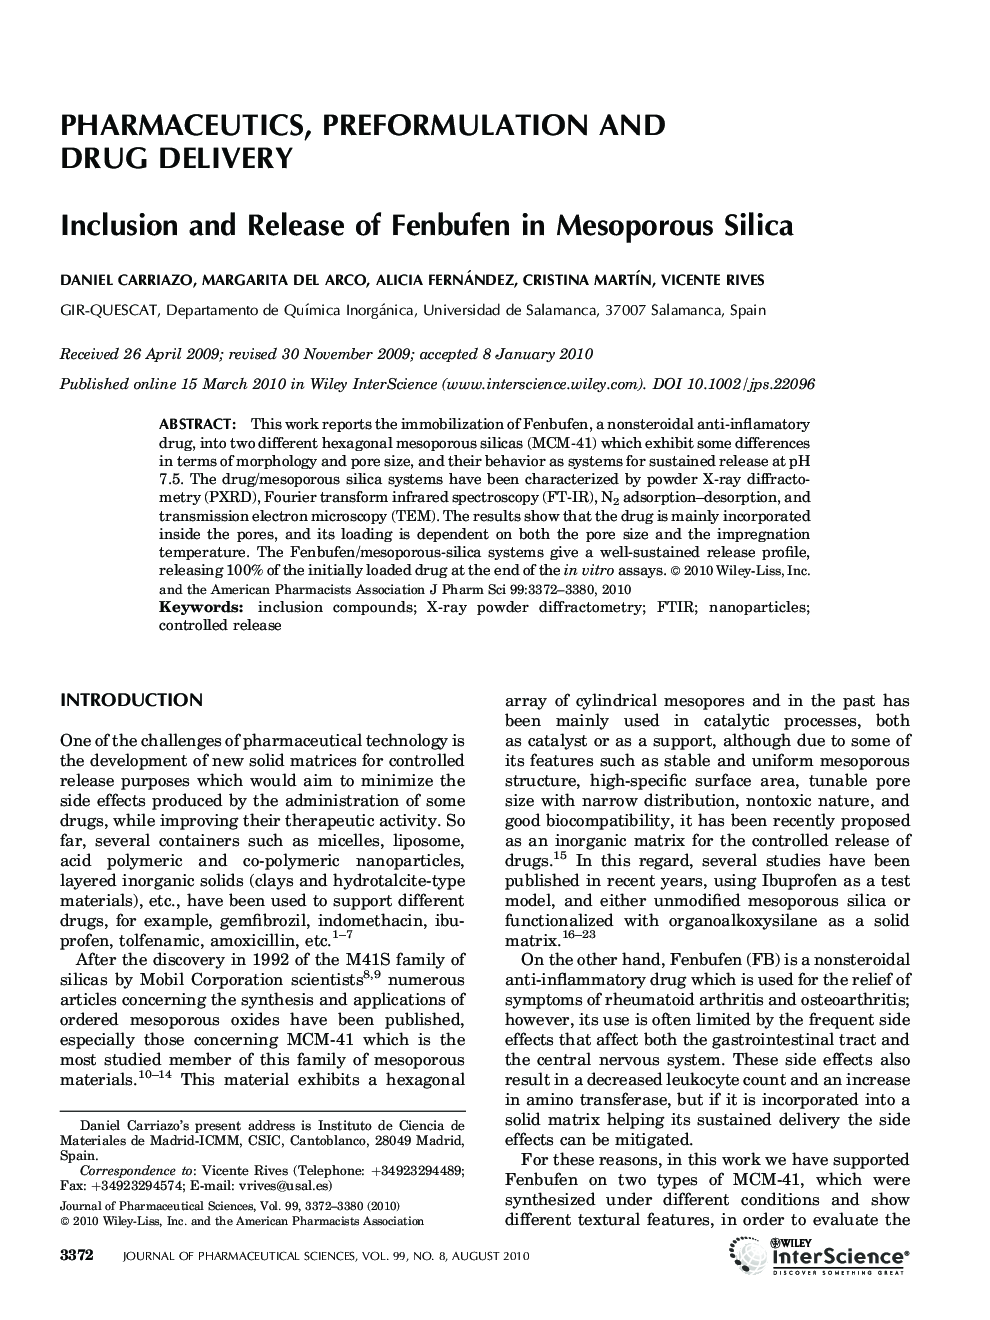 Inclusion and Release of Fenbufen in Mesoporous Silica